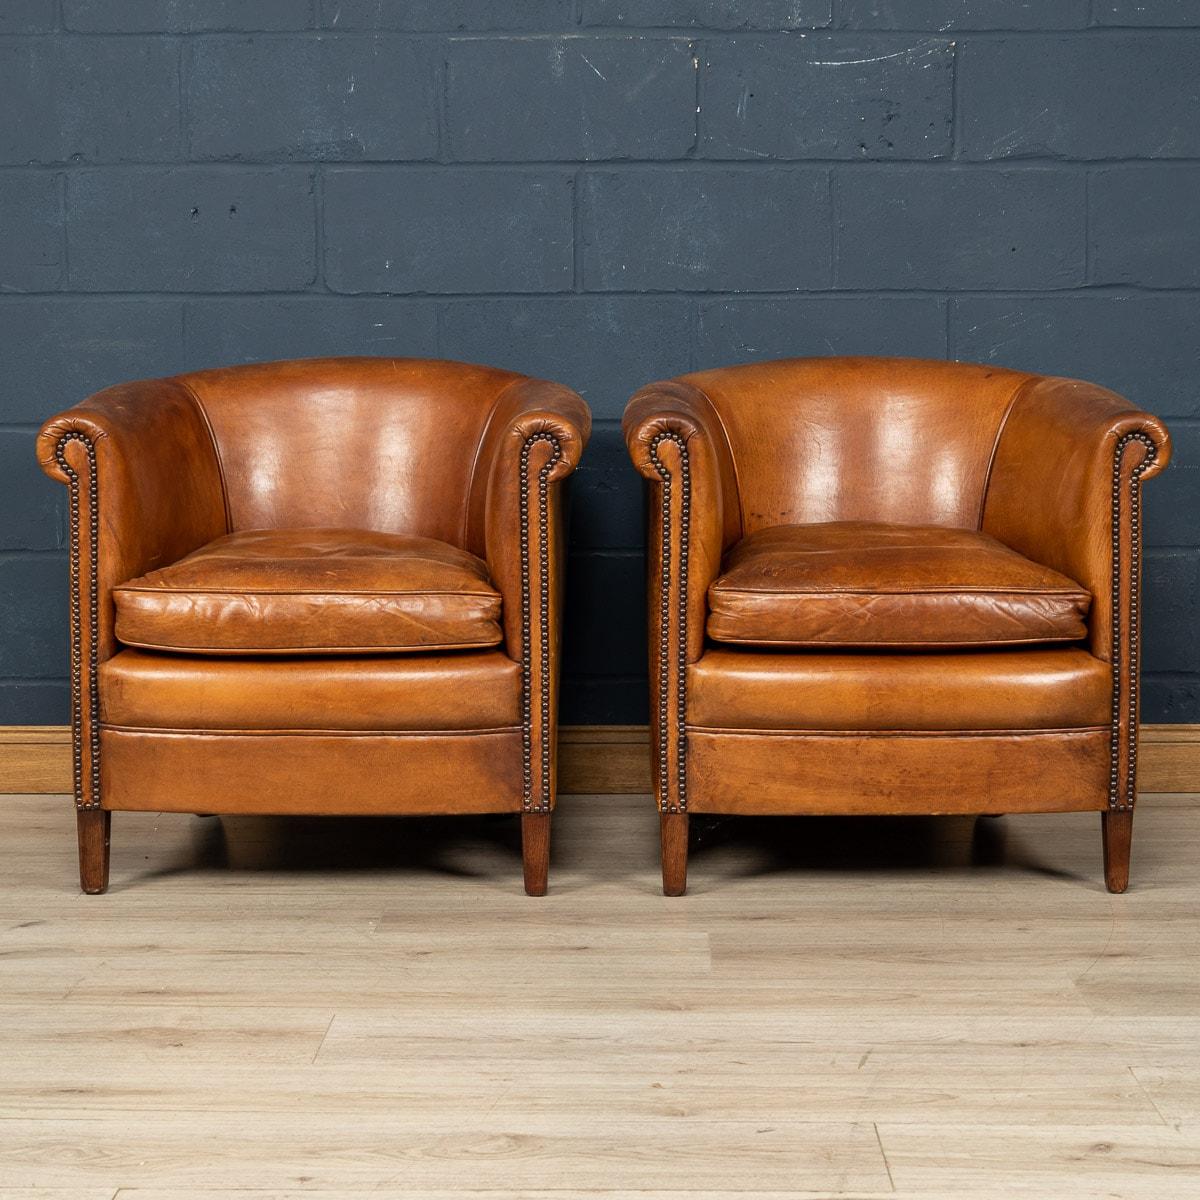 Showing superb patina and colour, this wonderful pair of club chairs were hand upholstered sheepskin leather in Holland by the finest craftsmen in the latter part of the 20th century.

CONDITION
In Good Condition - Some wear consistent with normal